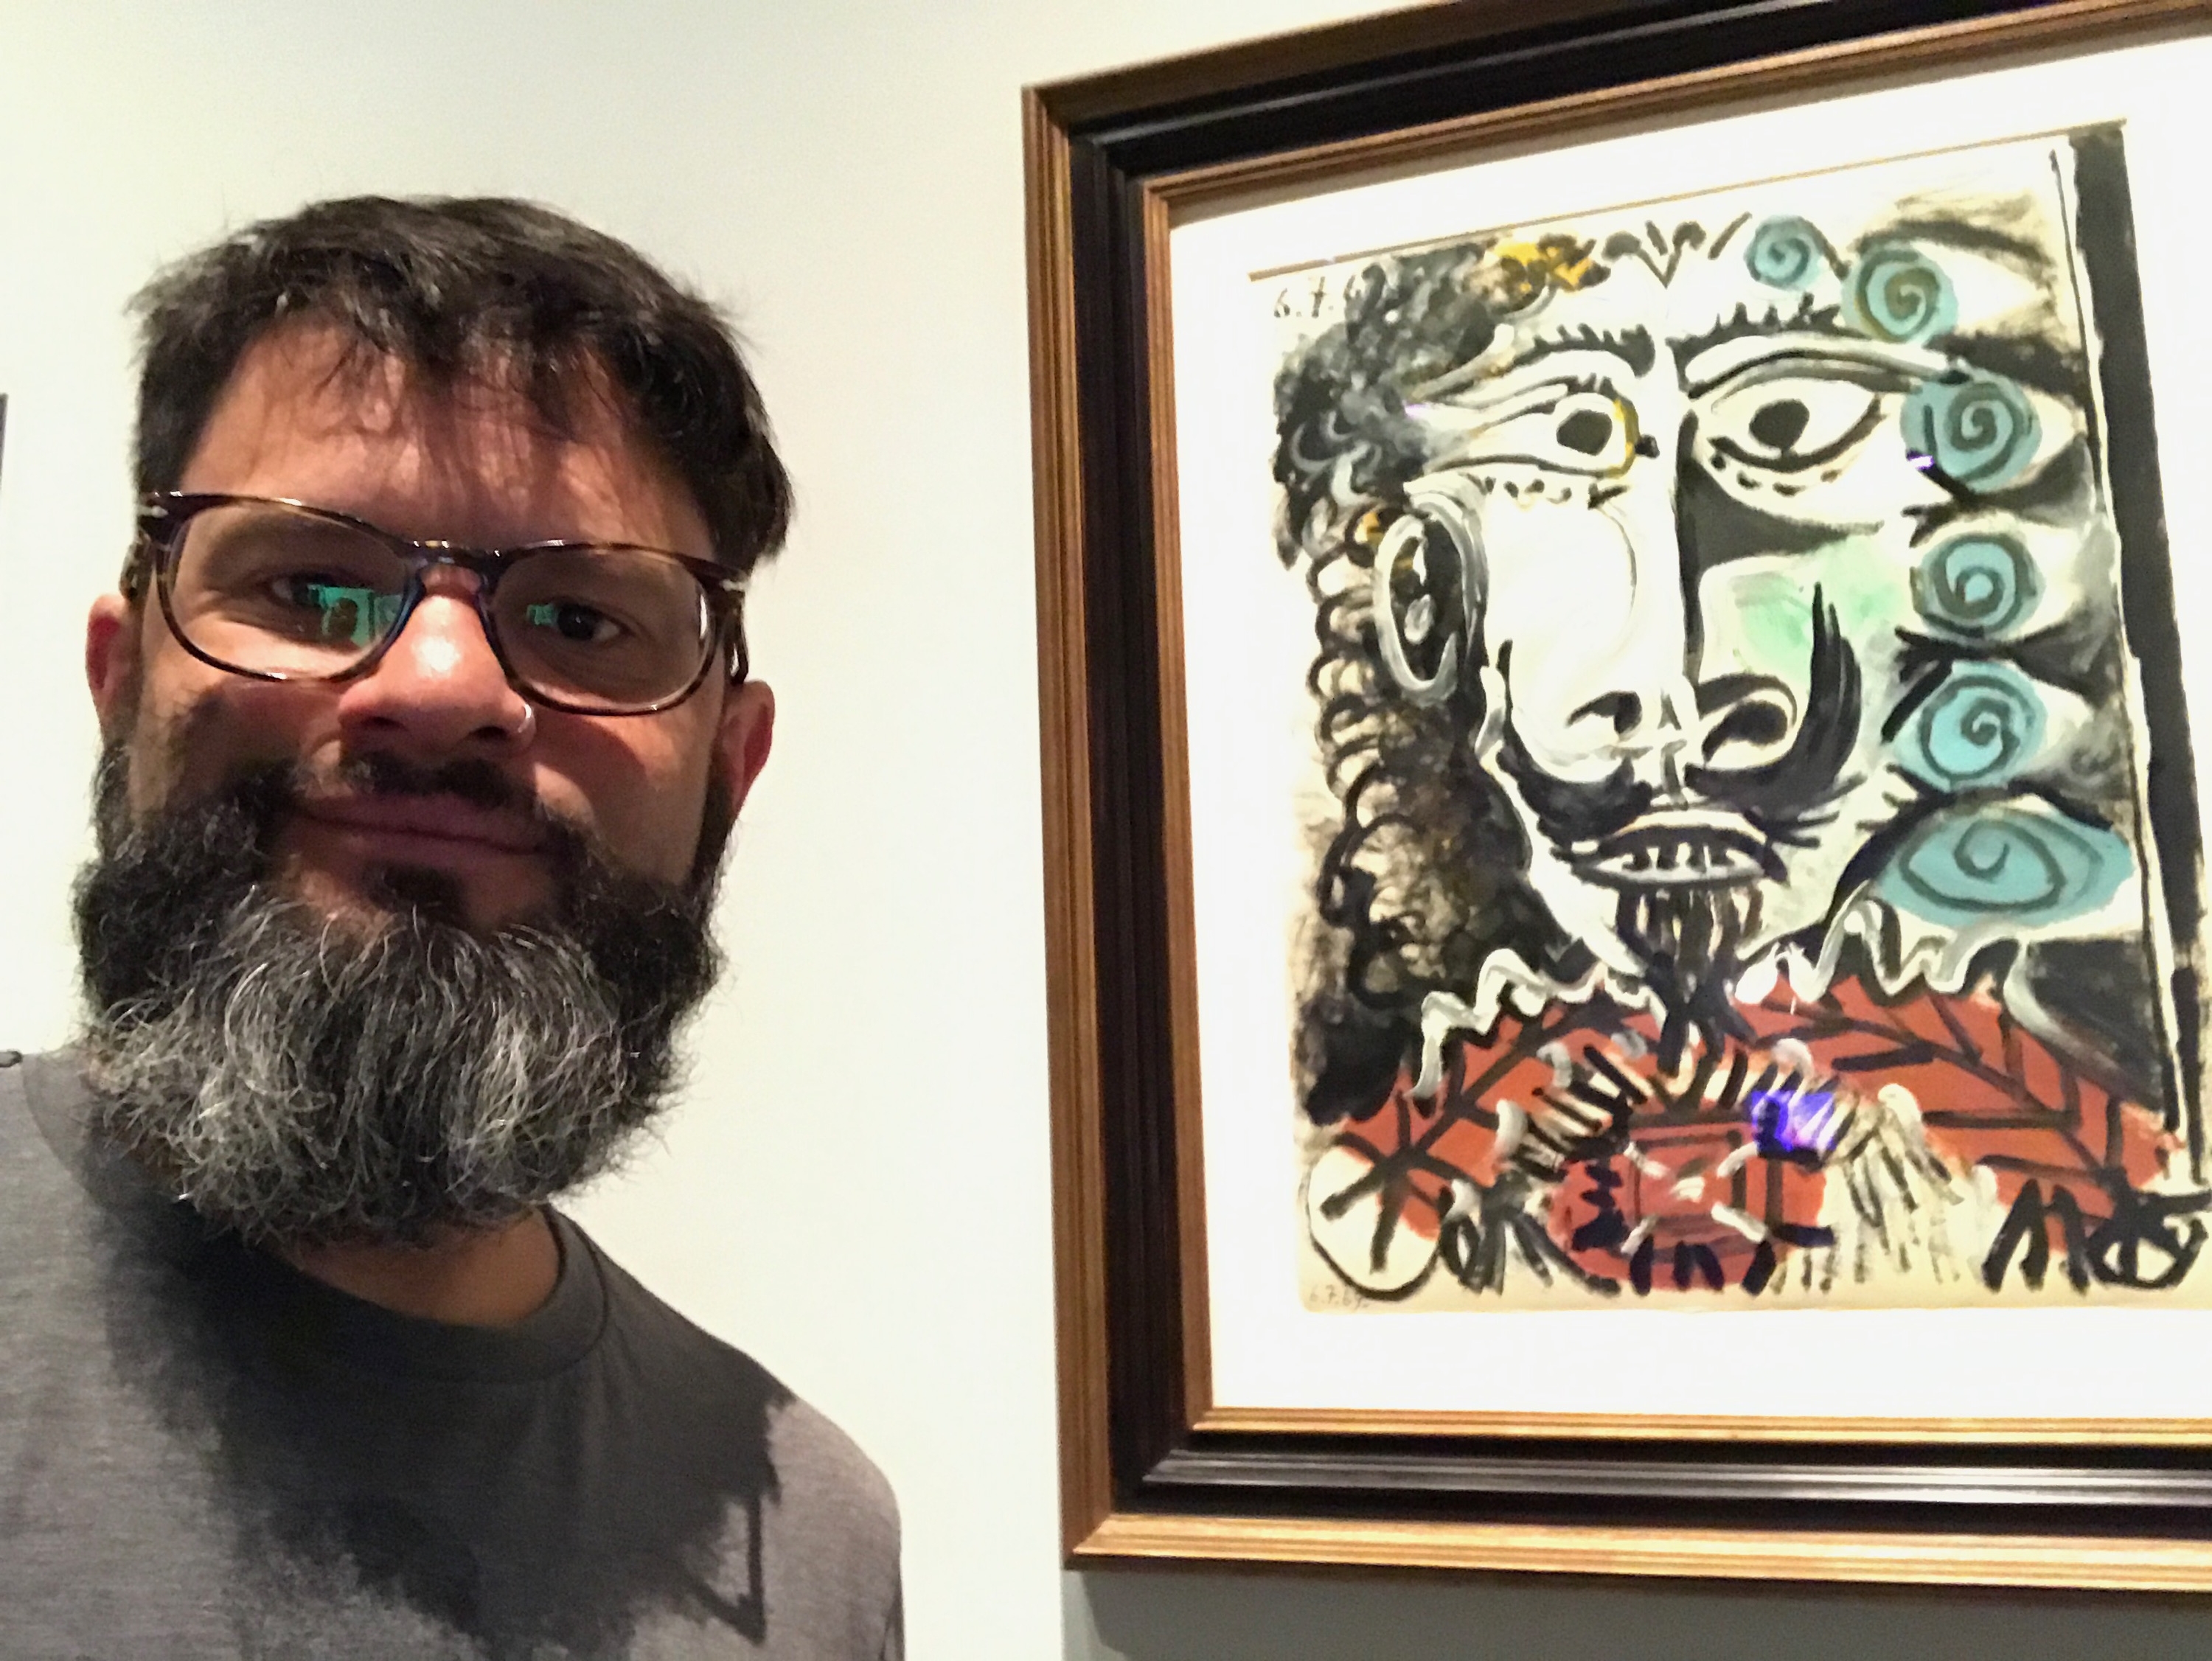 Here I am with an amazing Picasso on exhibit in the LACMA in Los Angeles